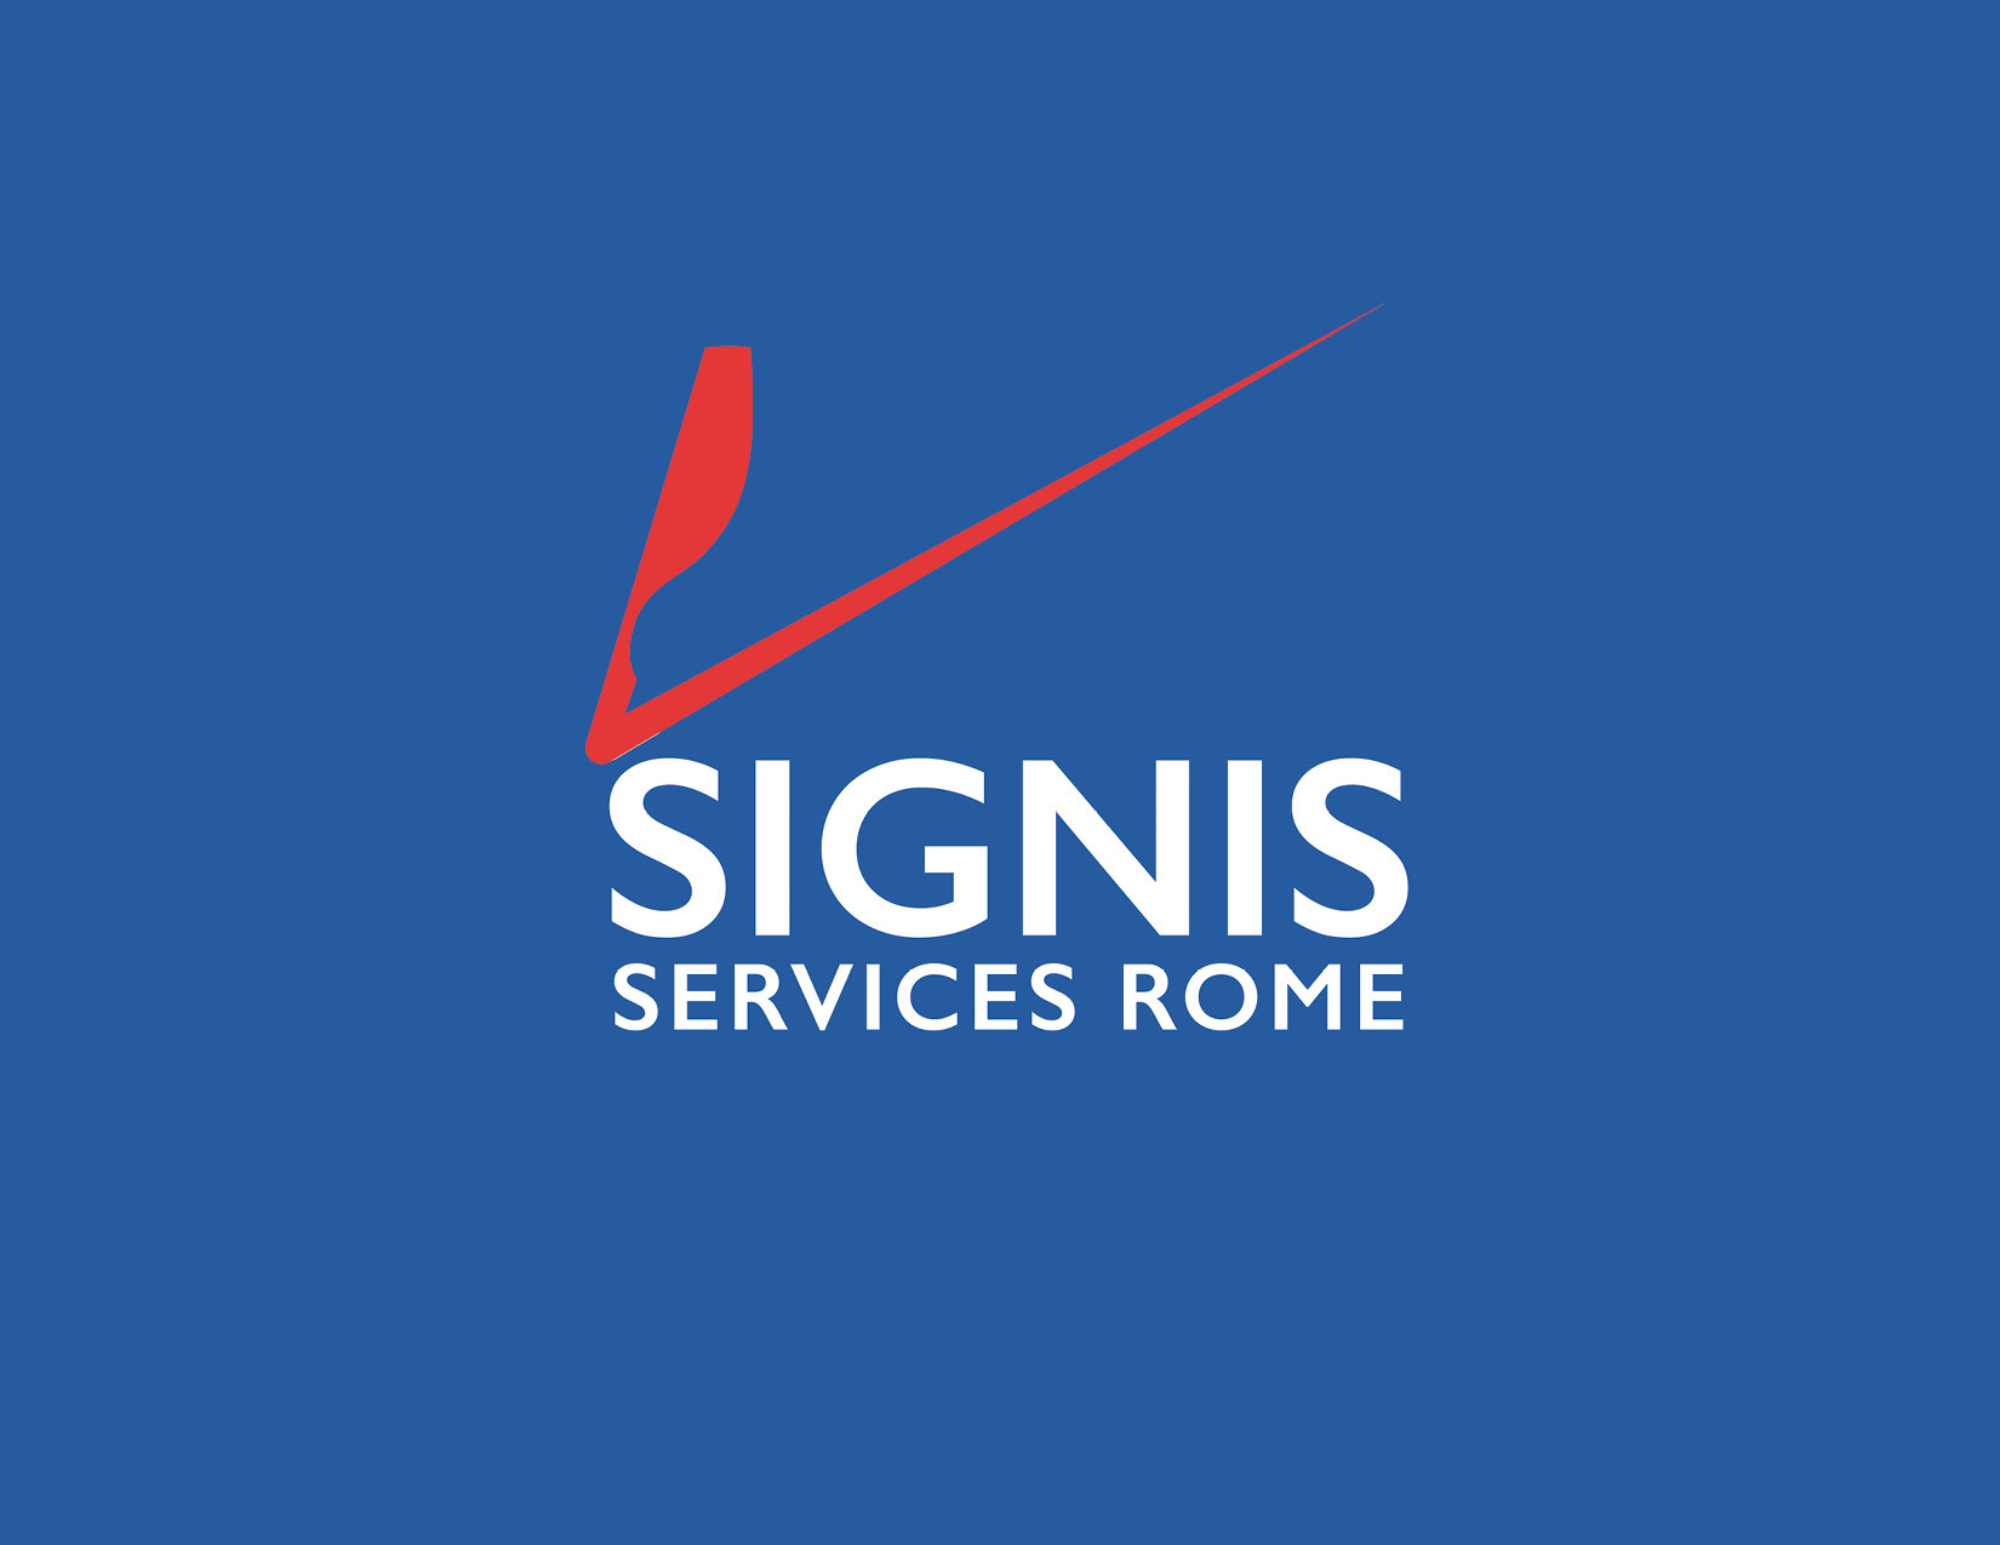 Annual reports – SIGNIS Services Rome